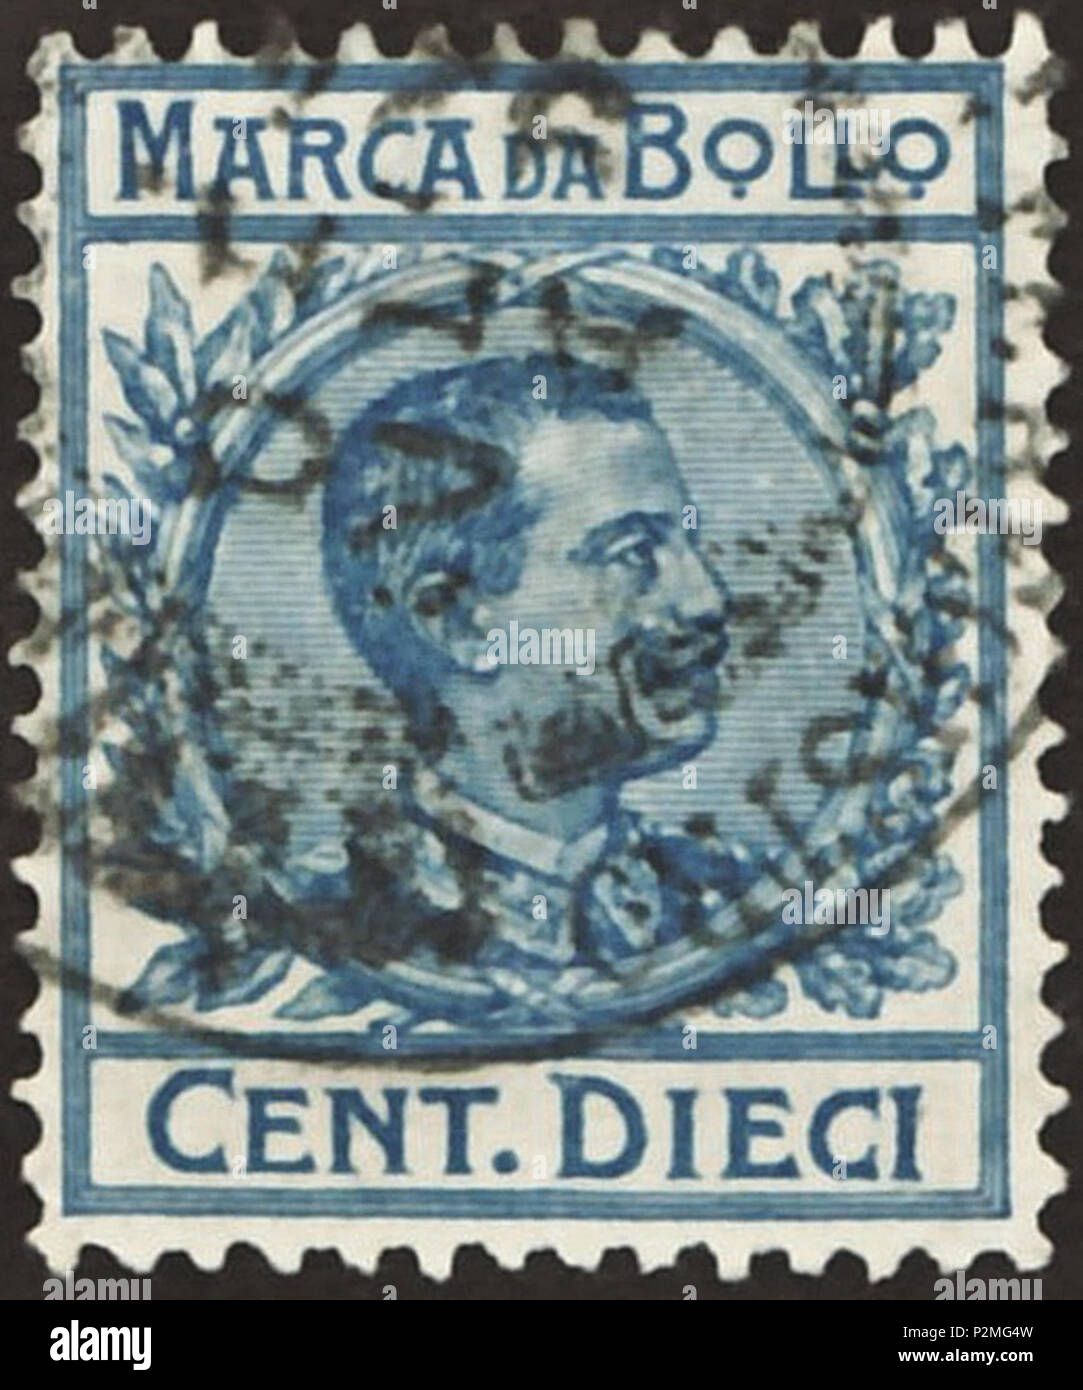 Stamp of the Kingdom of Italy; 1905; revenue stamp (Italian: 'Marco da  Bollo') of the issue 'King Vittorio Emanuele III in circle with view to  right' (1905-1920); framed drawing of an